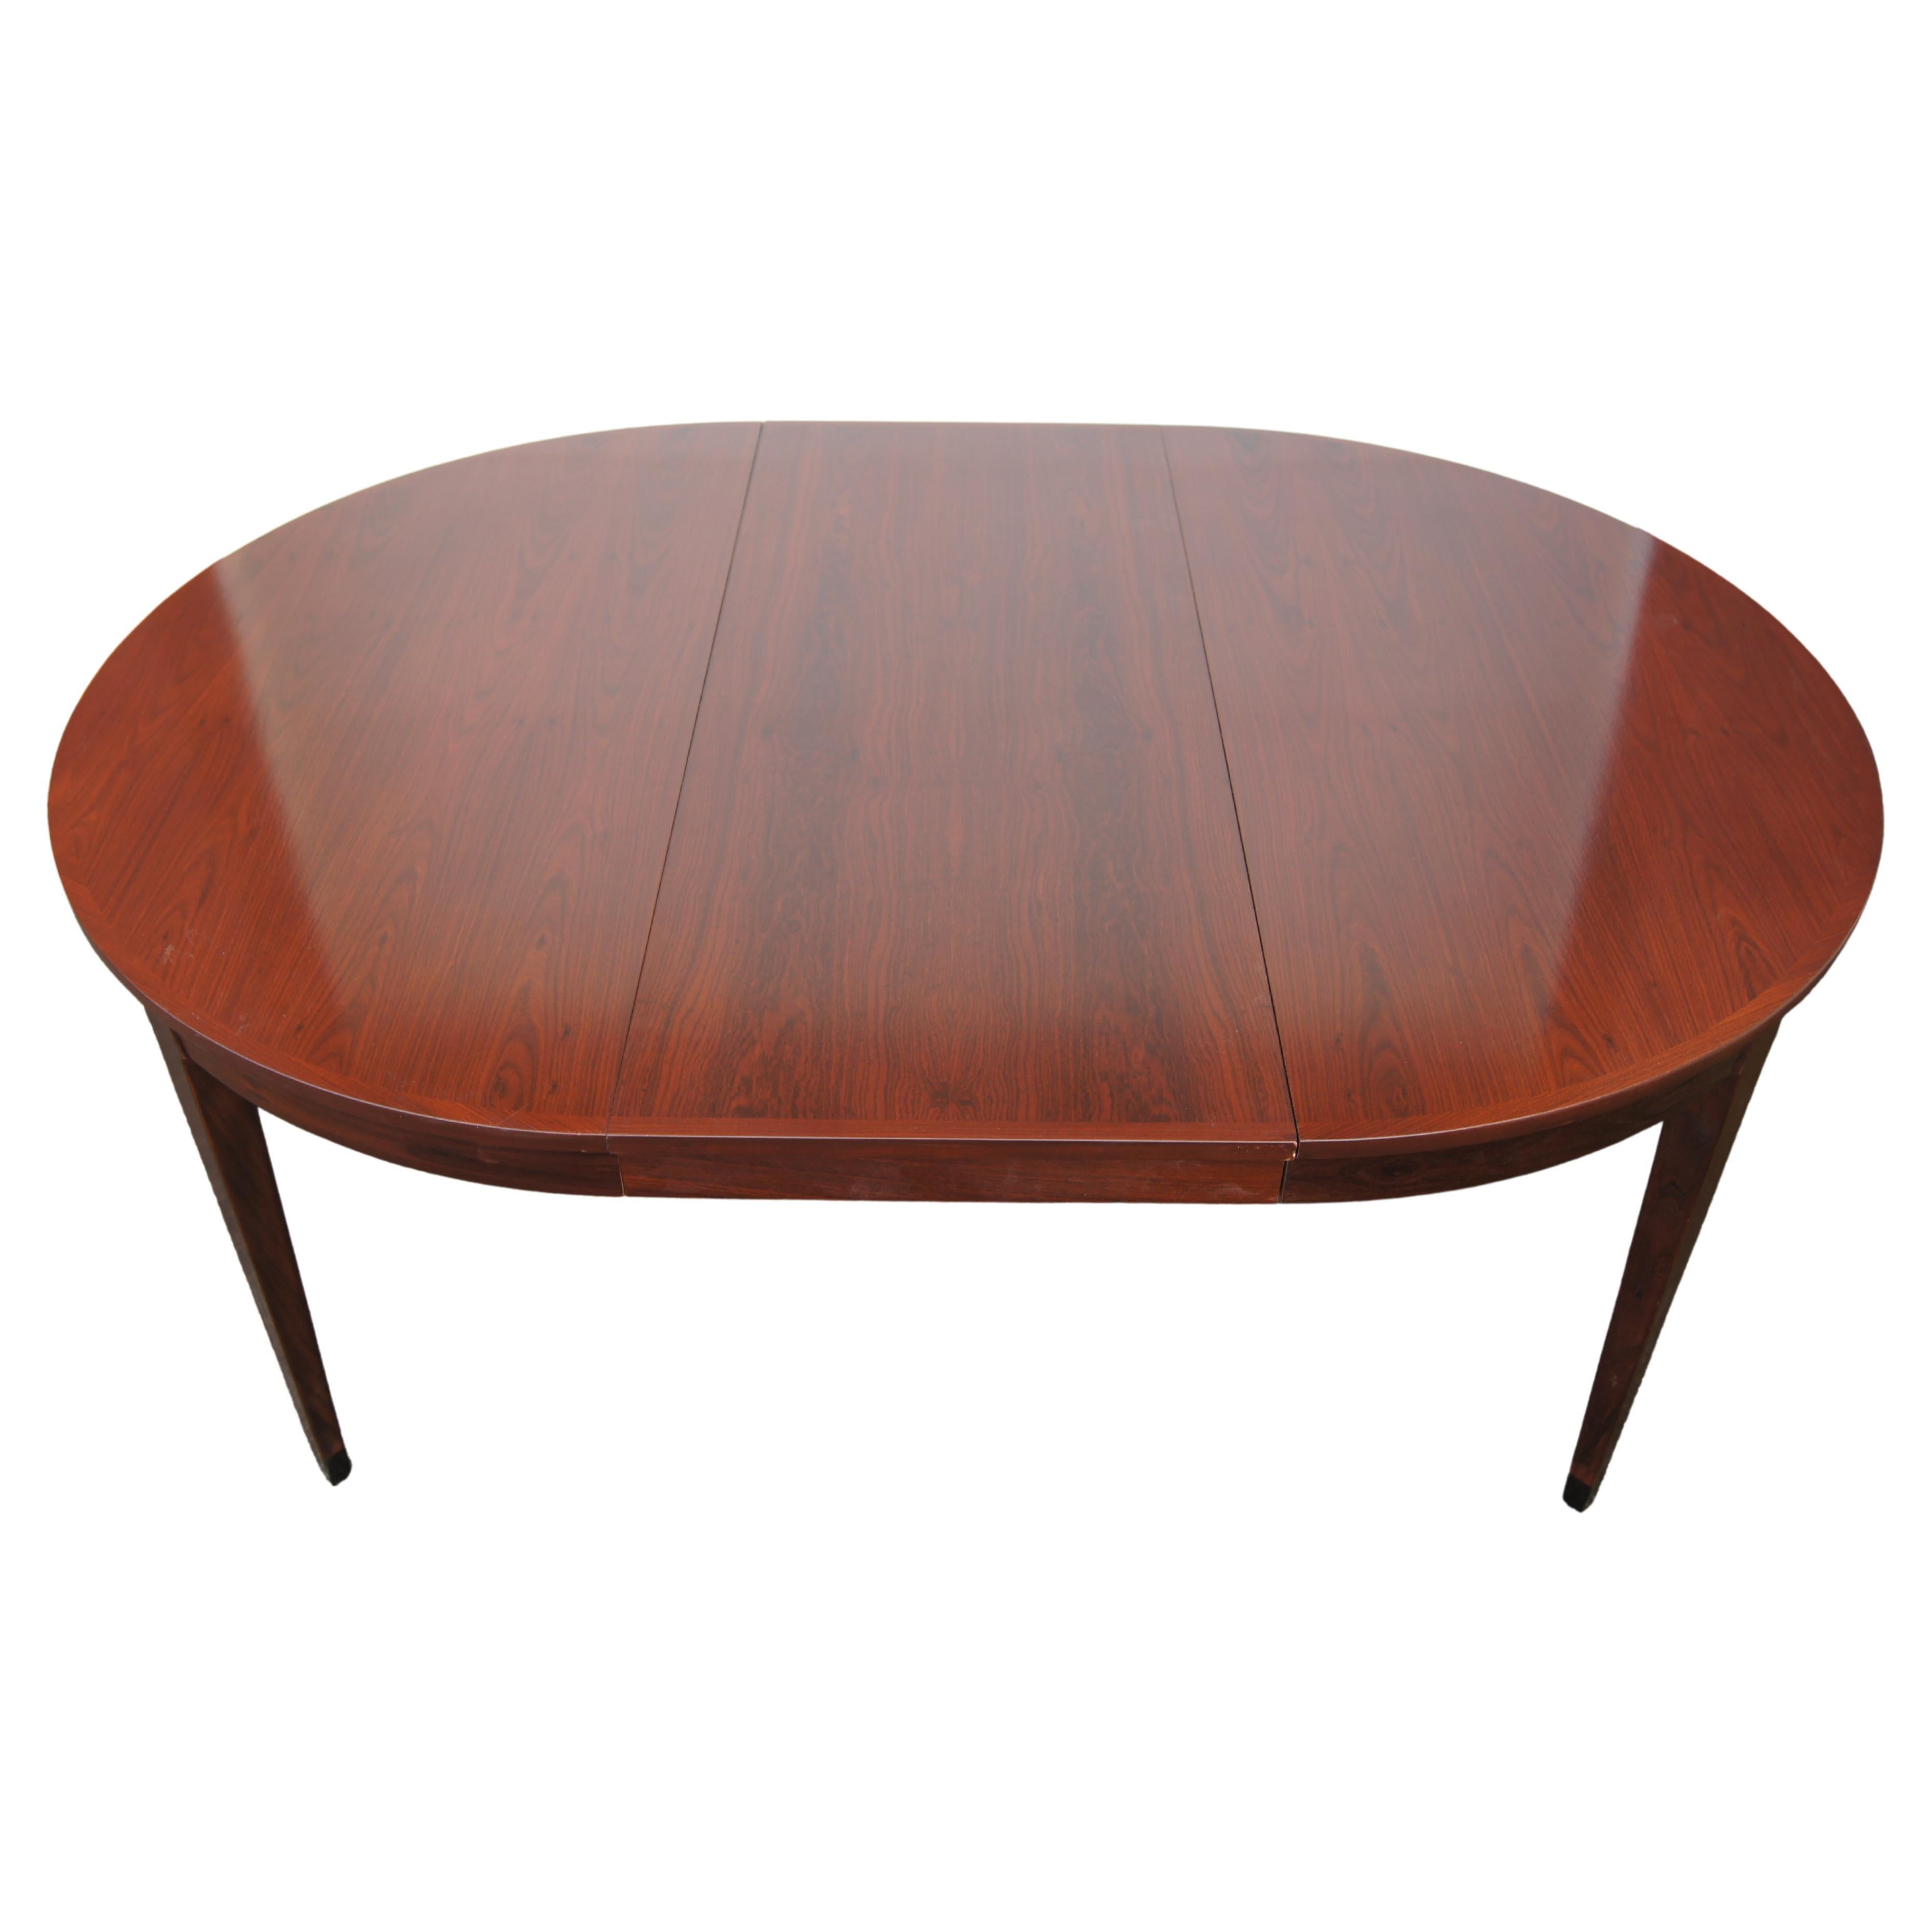 Round Rosewood Dining Table with Extension by Arne Vodder